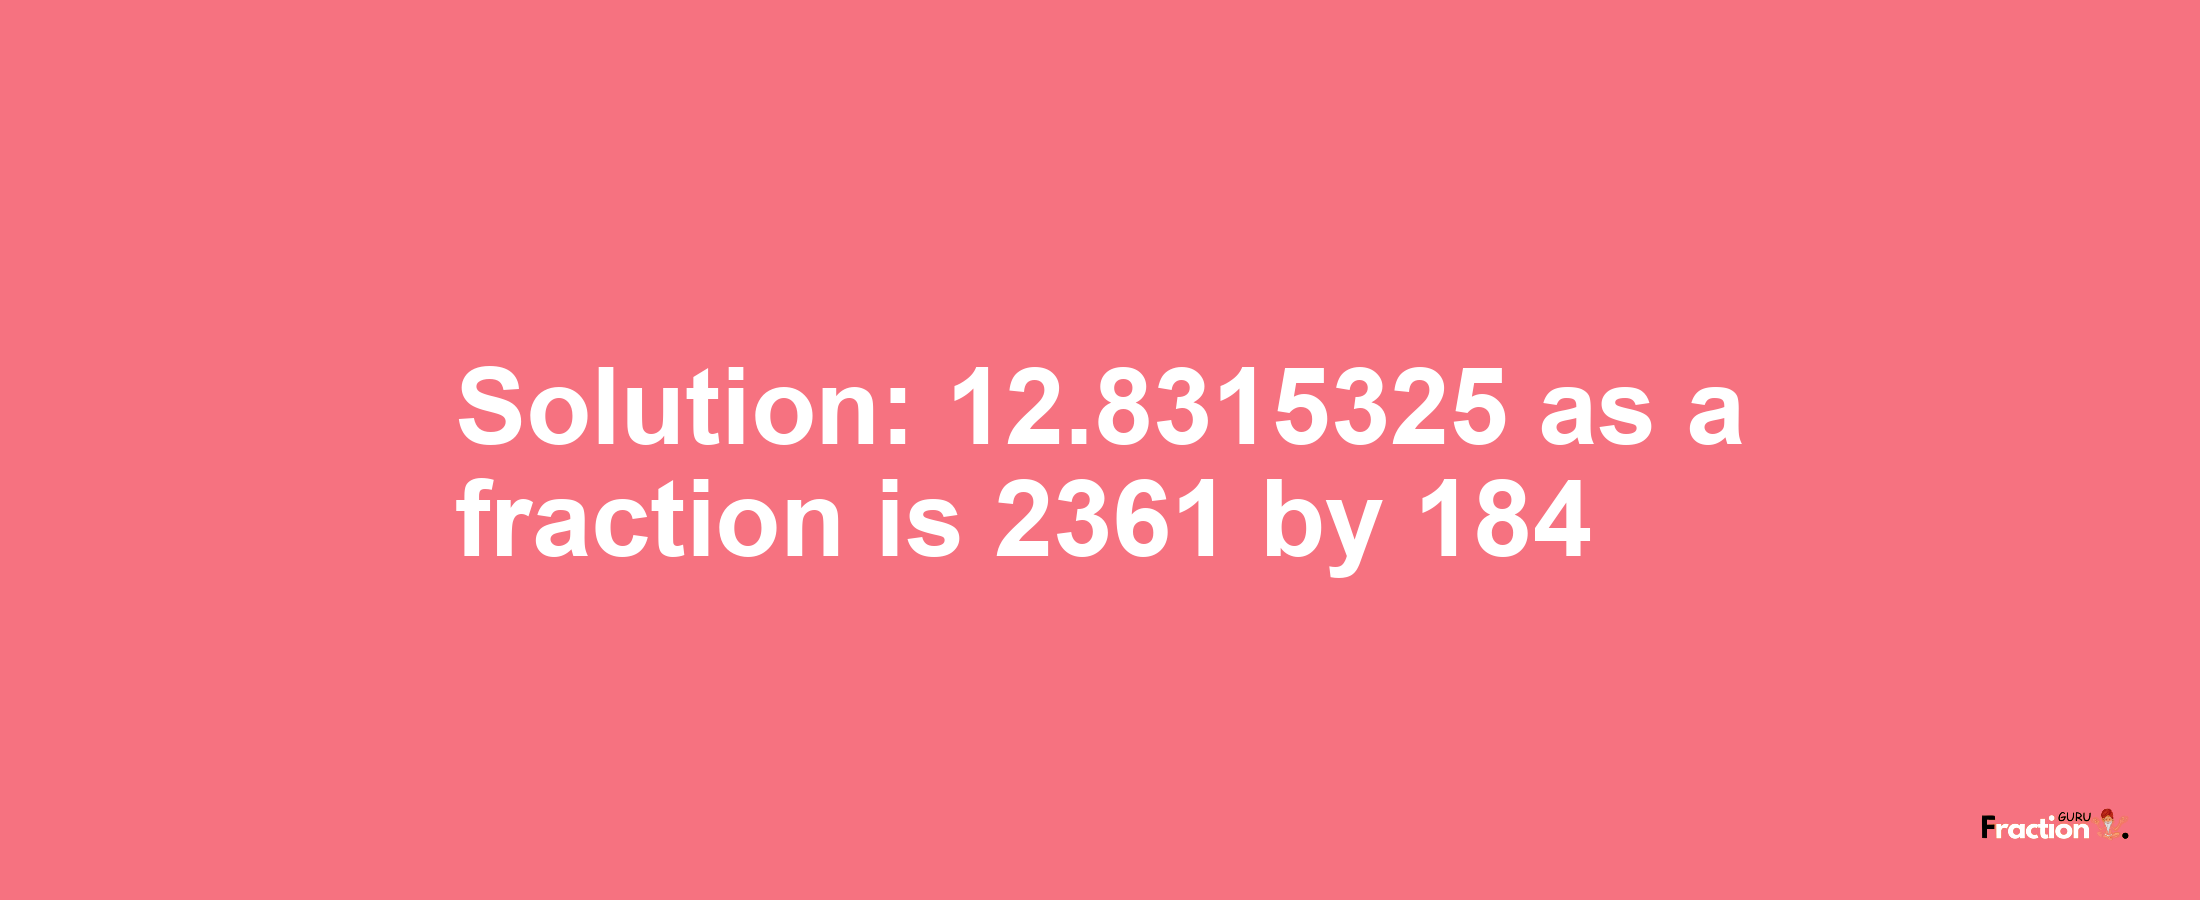 Solution:12.8315325 as a fraction is 2361/184